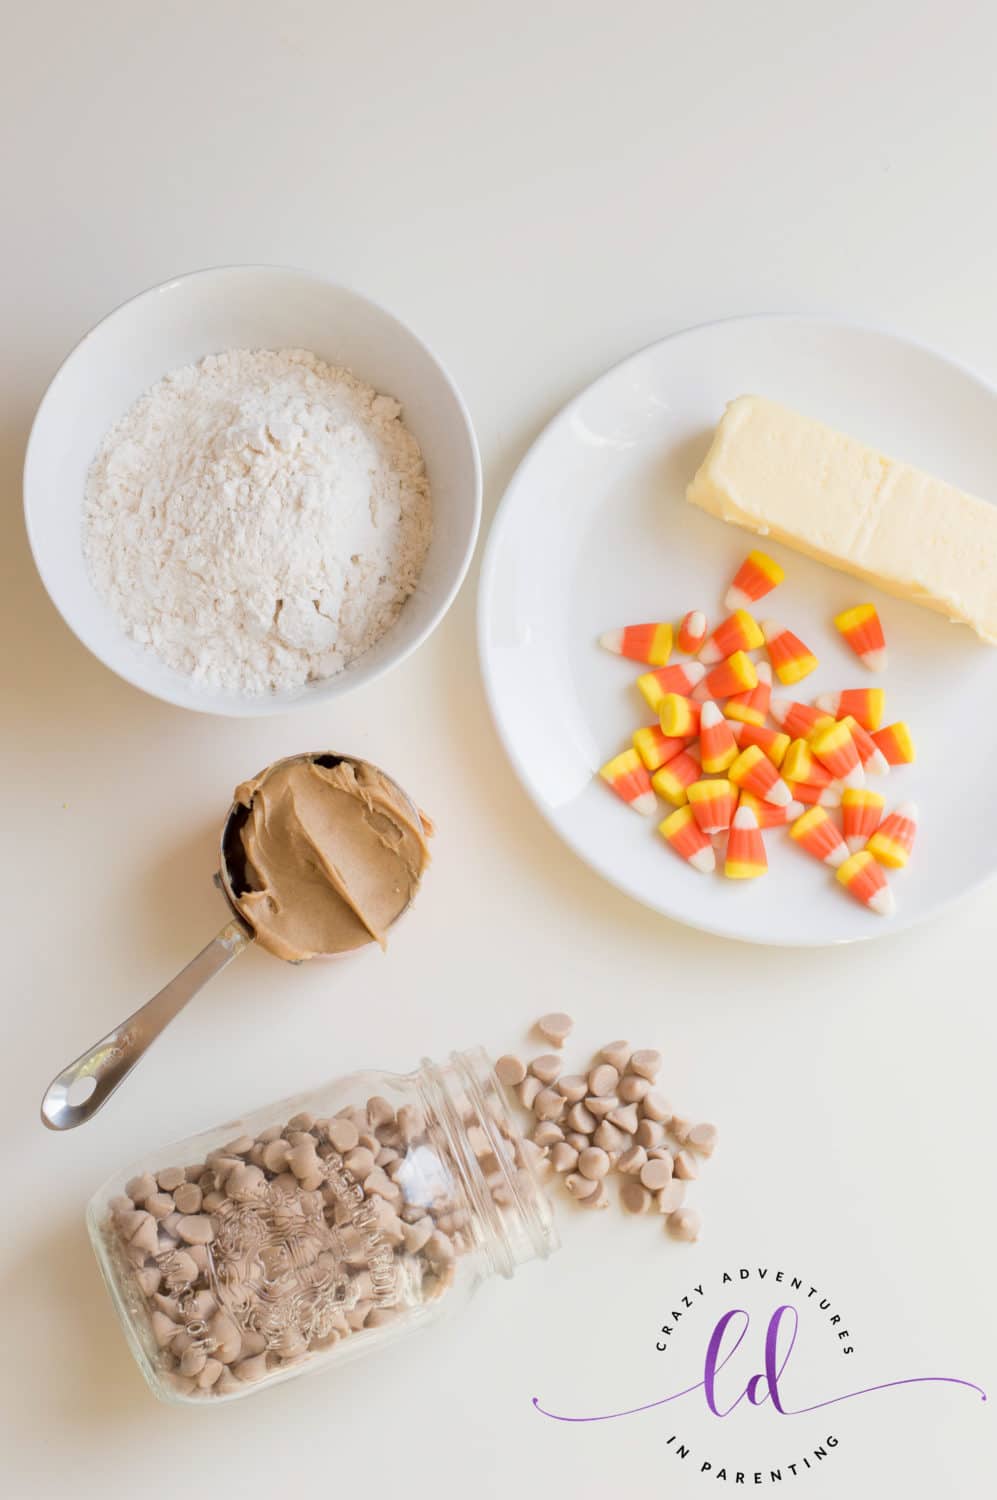 Ingredients to Make Candy Corn Peanut Butter Cookies